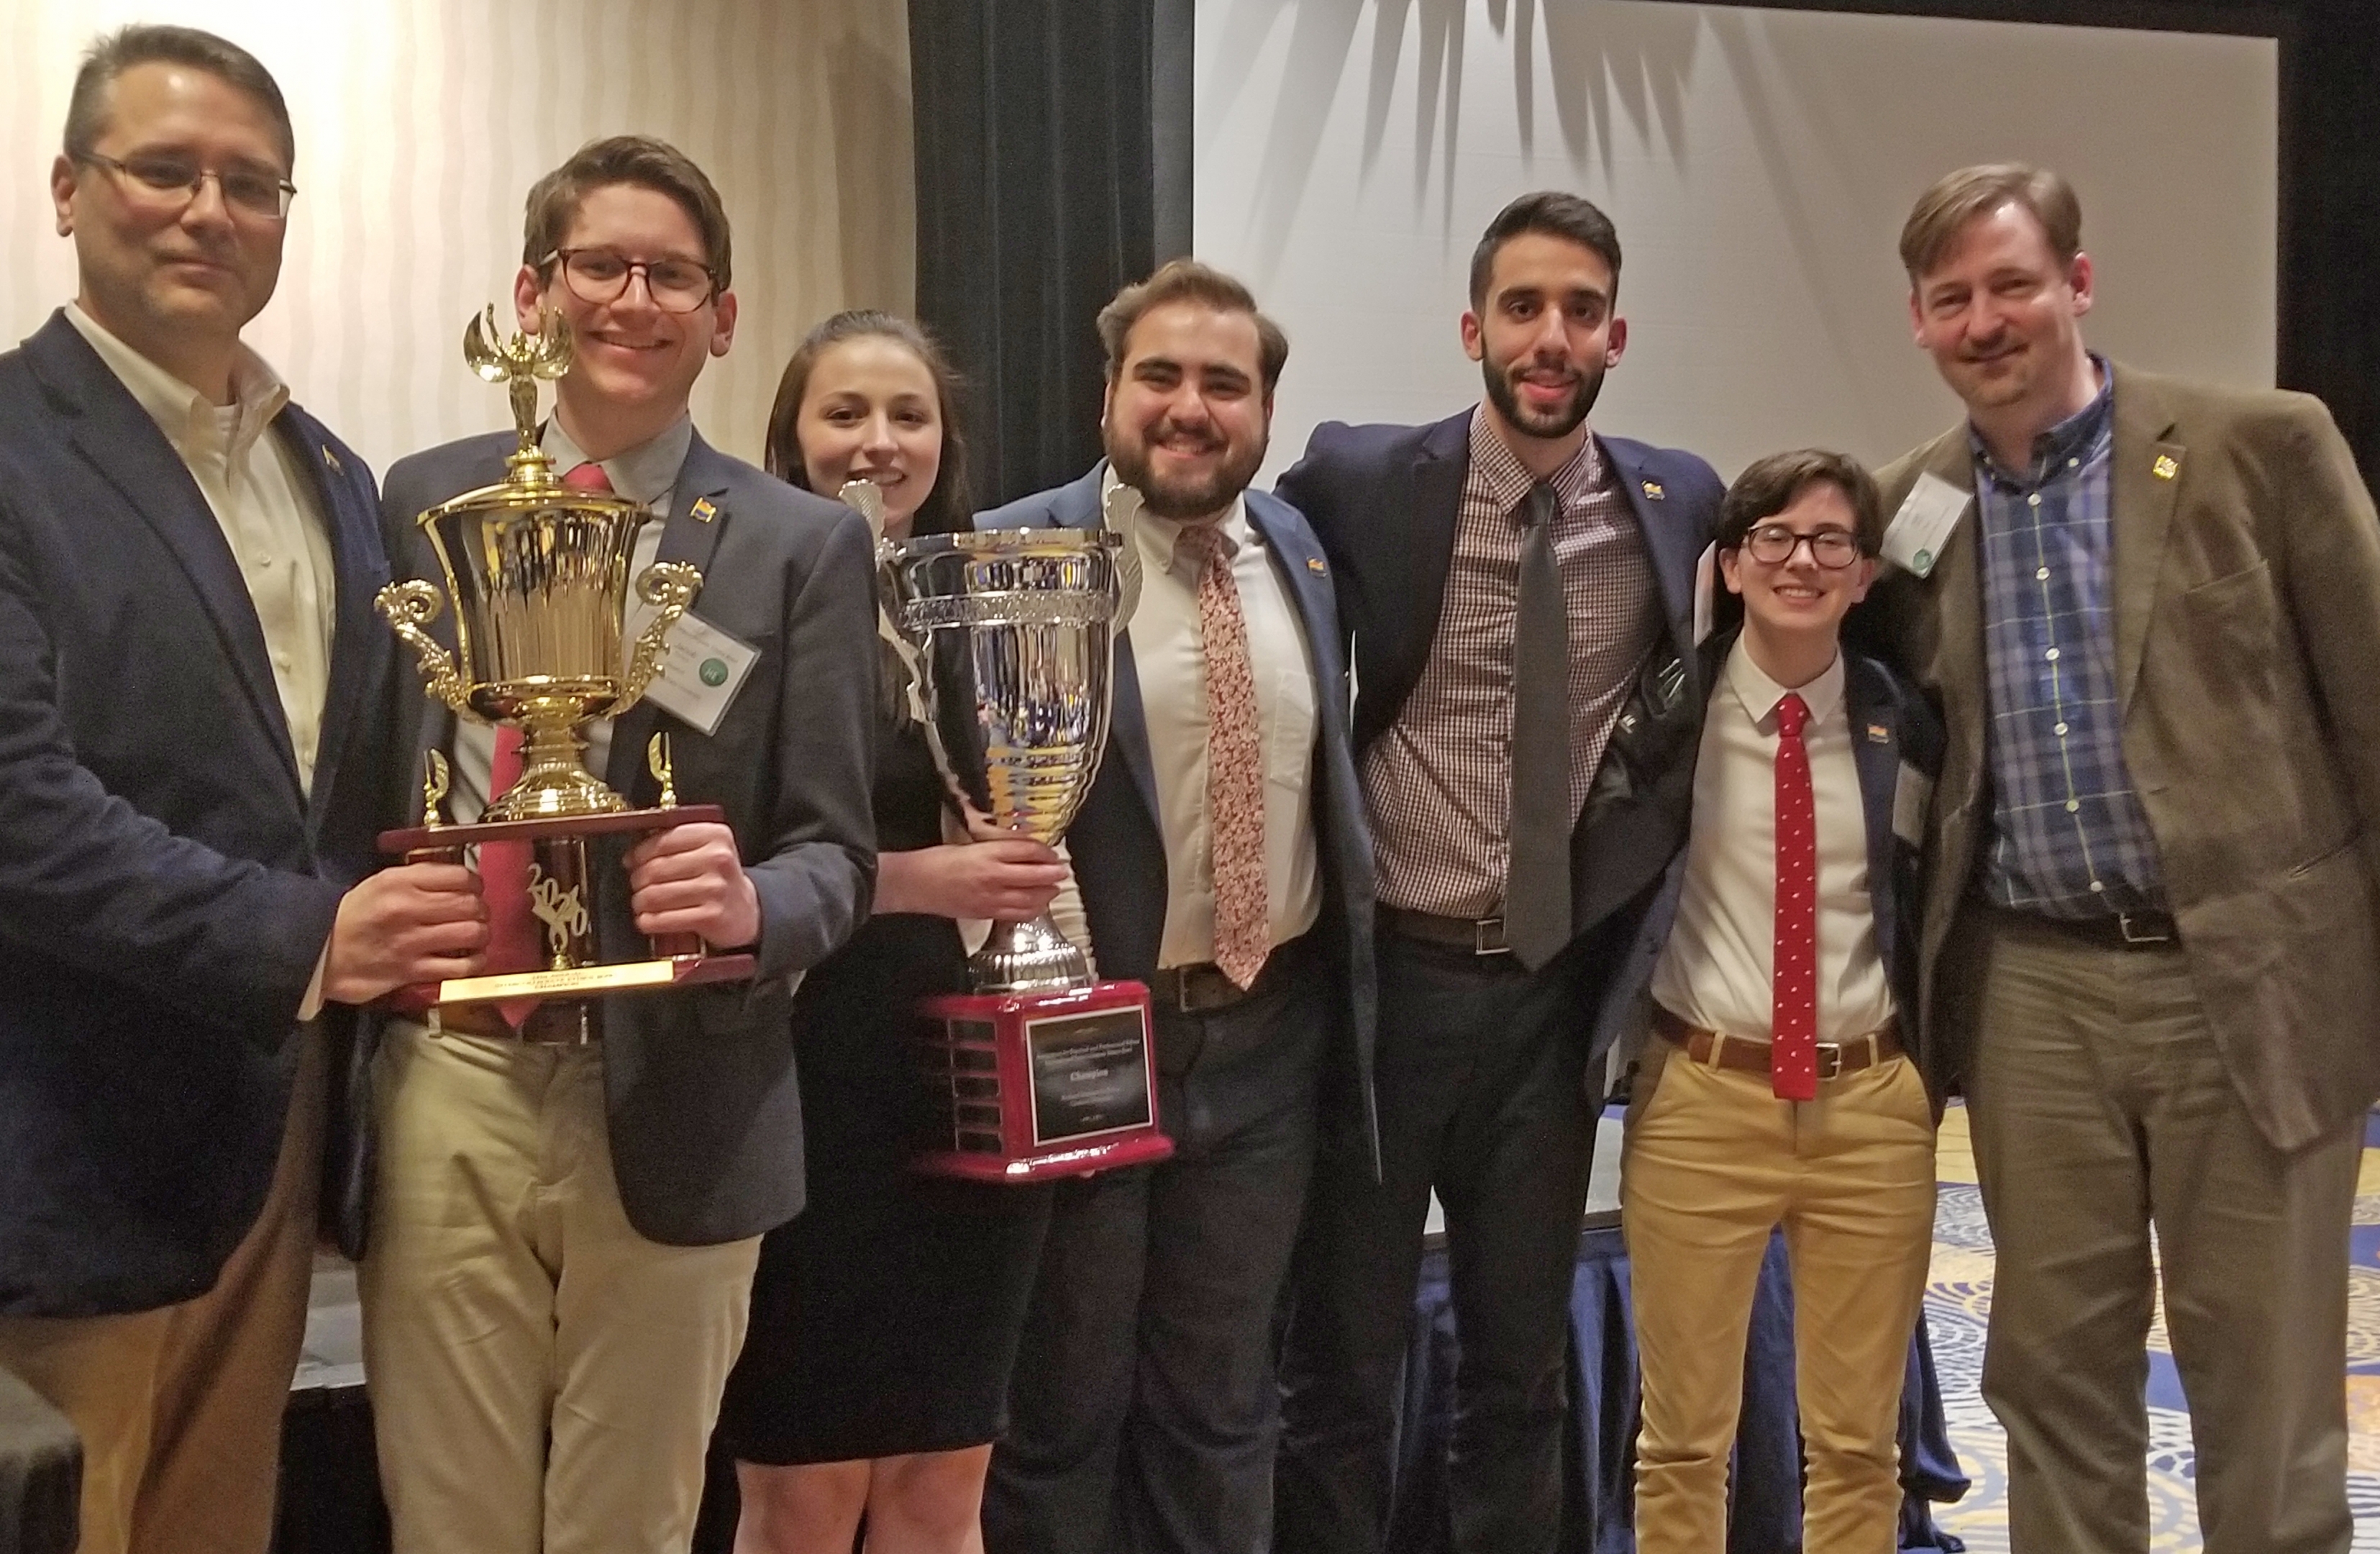 Youngstown State University’s Ethics Bowl team is #1 in the nation